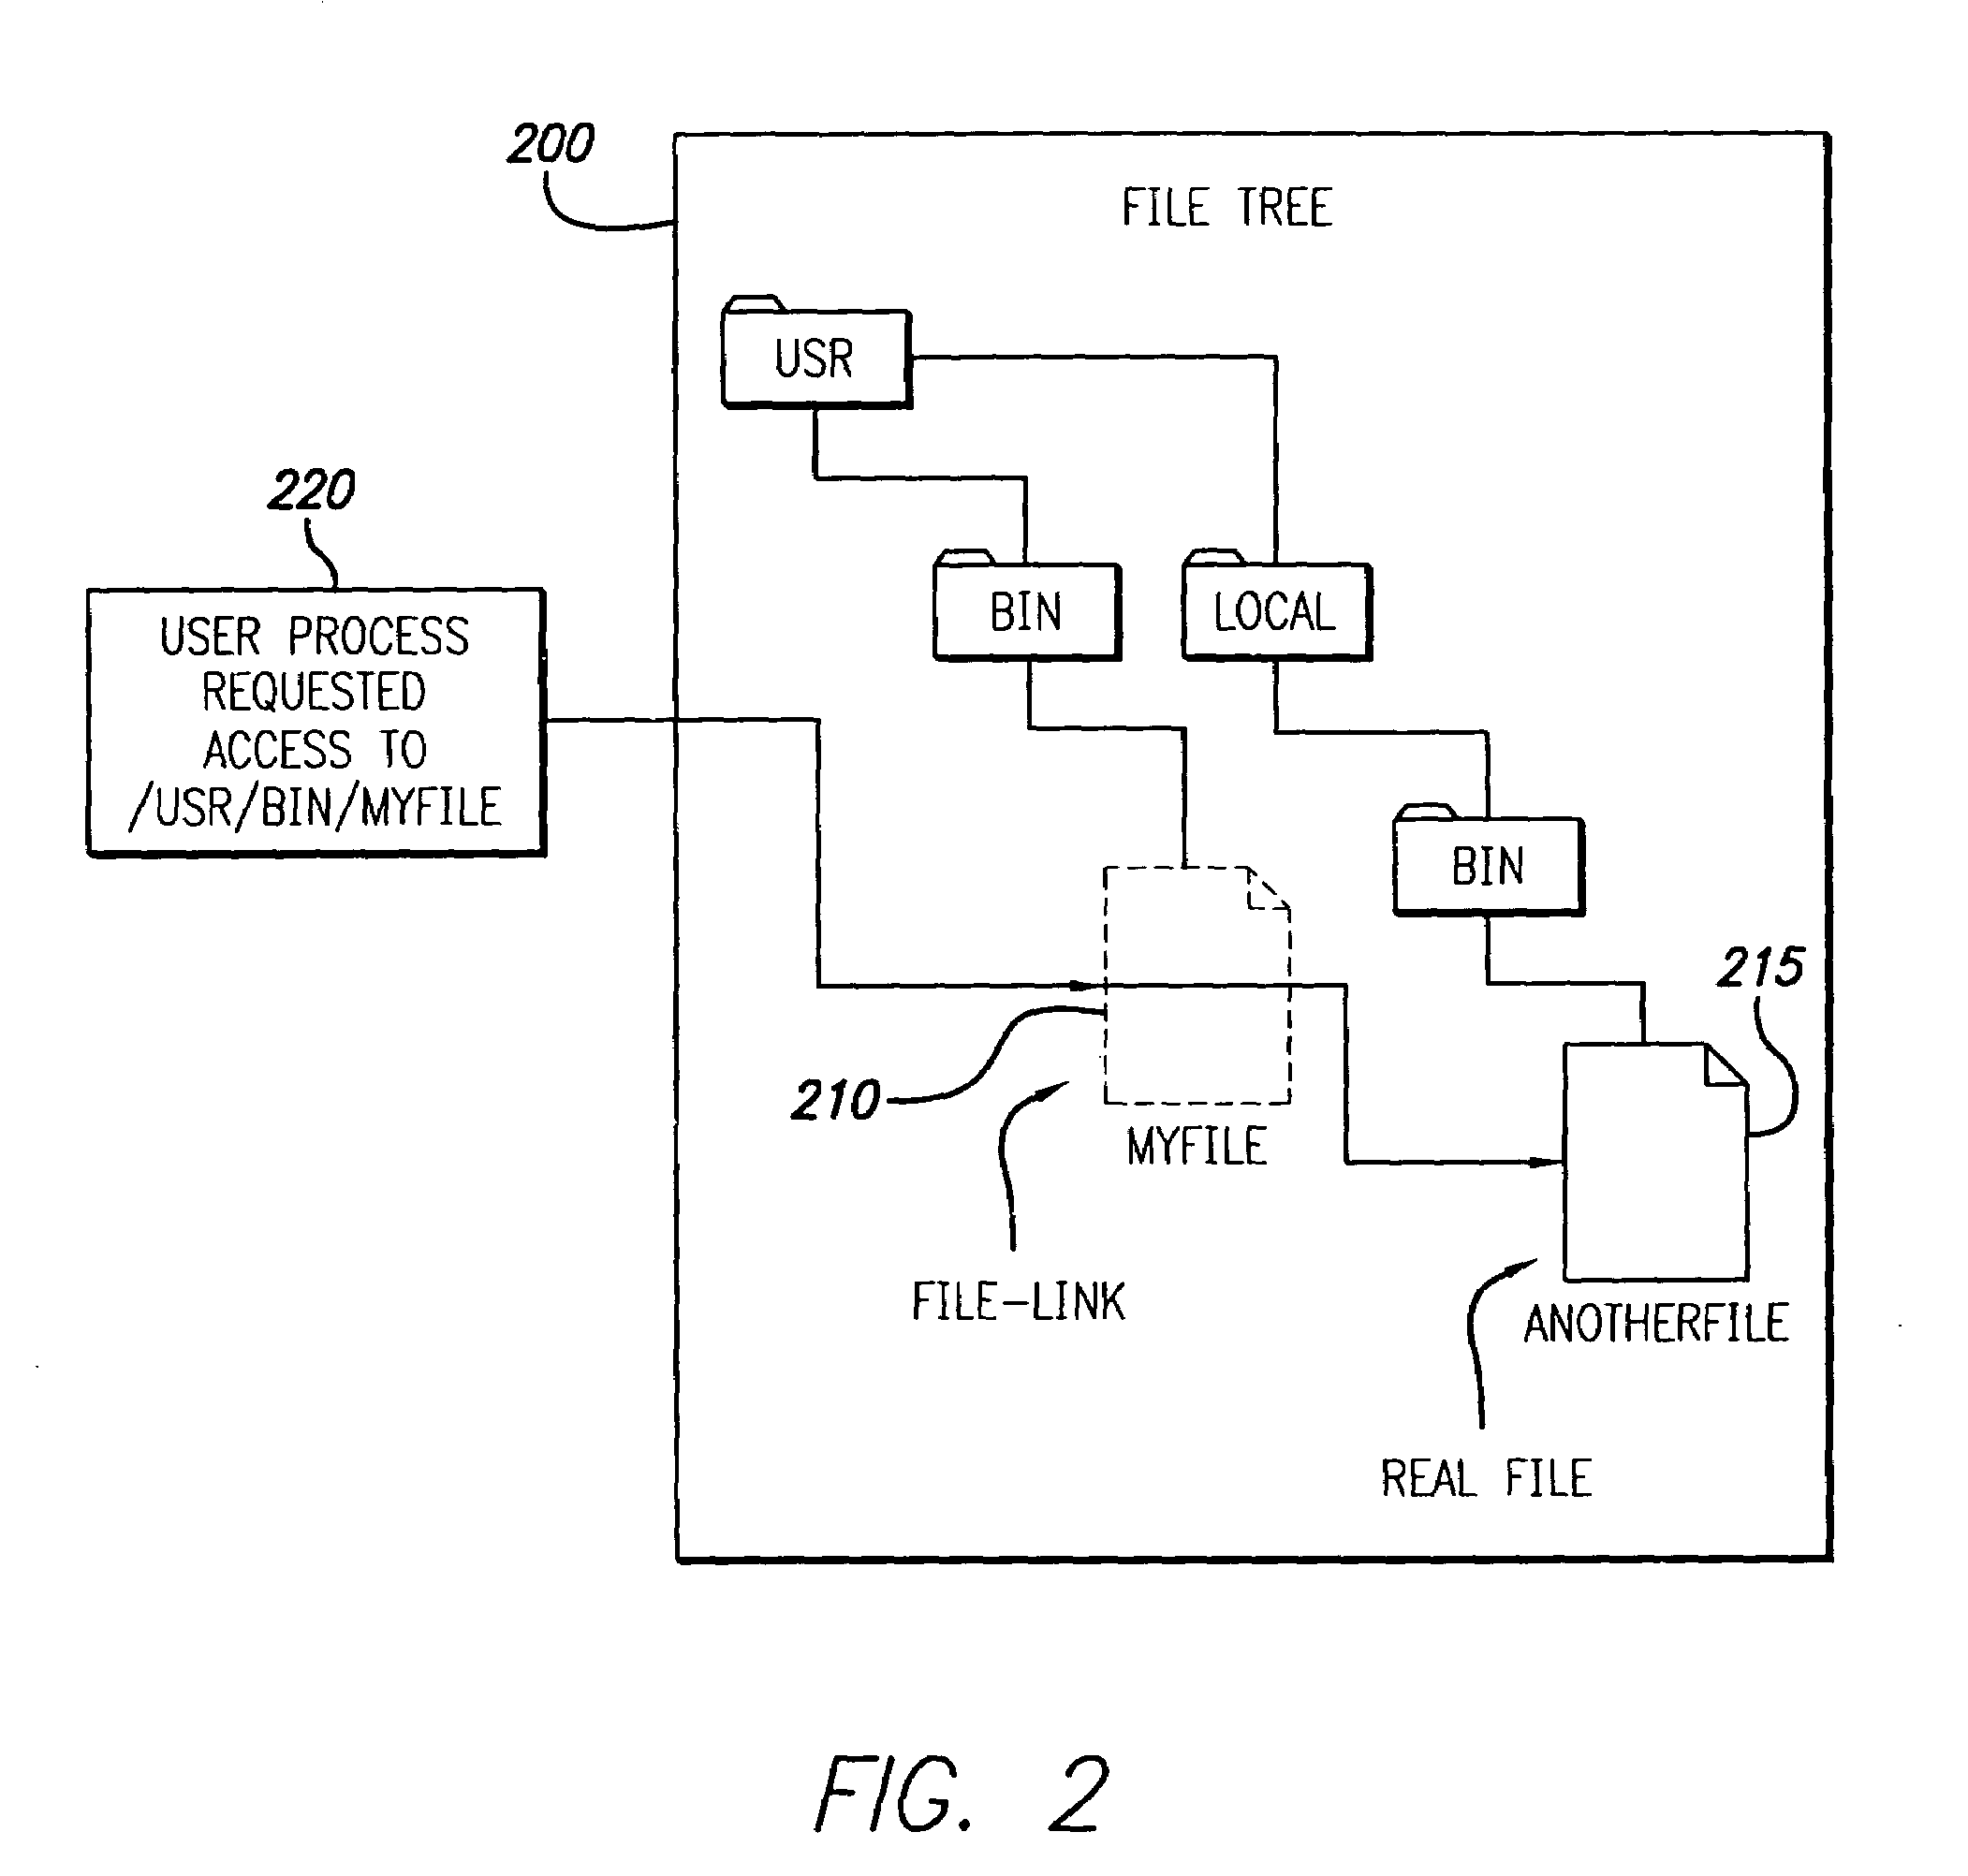 System and method for providing effective file-sharing in a computer system to allow concurrent multi-user access